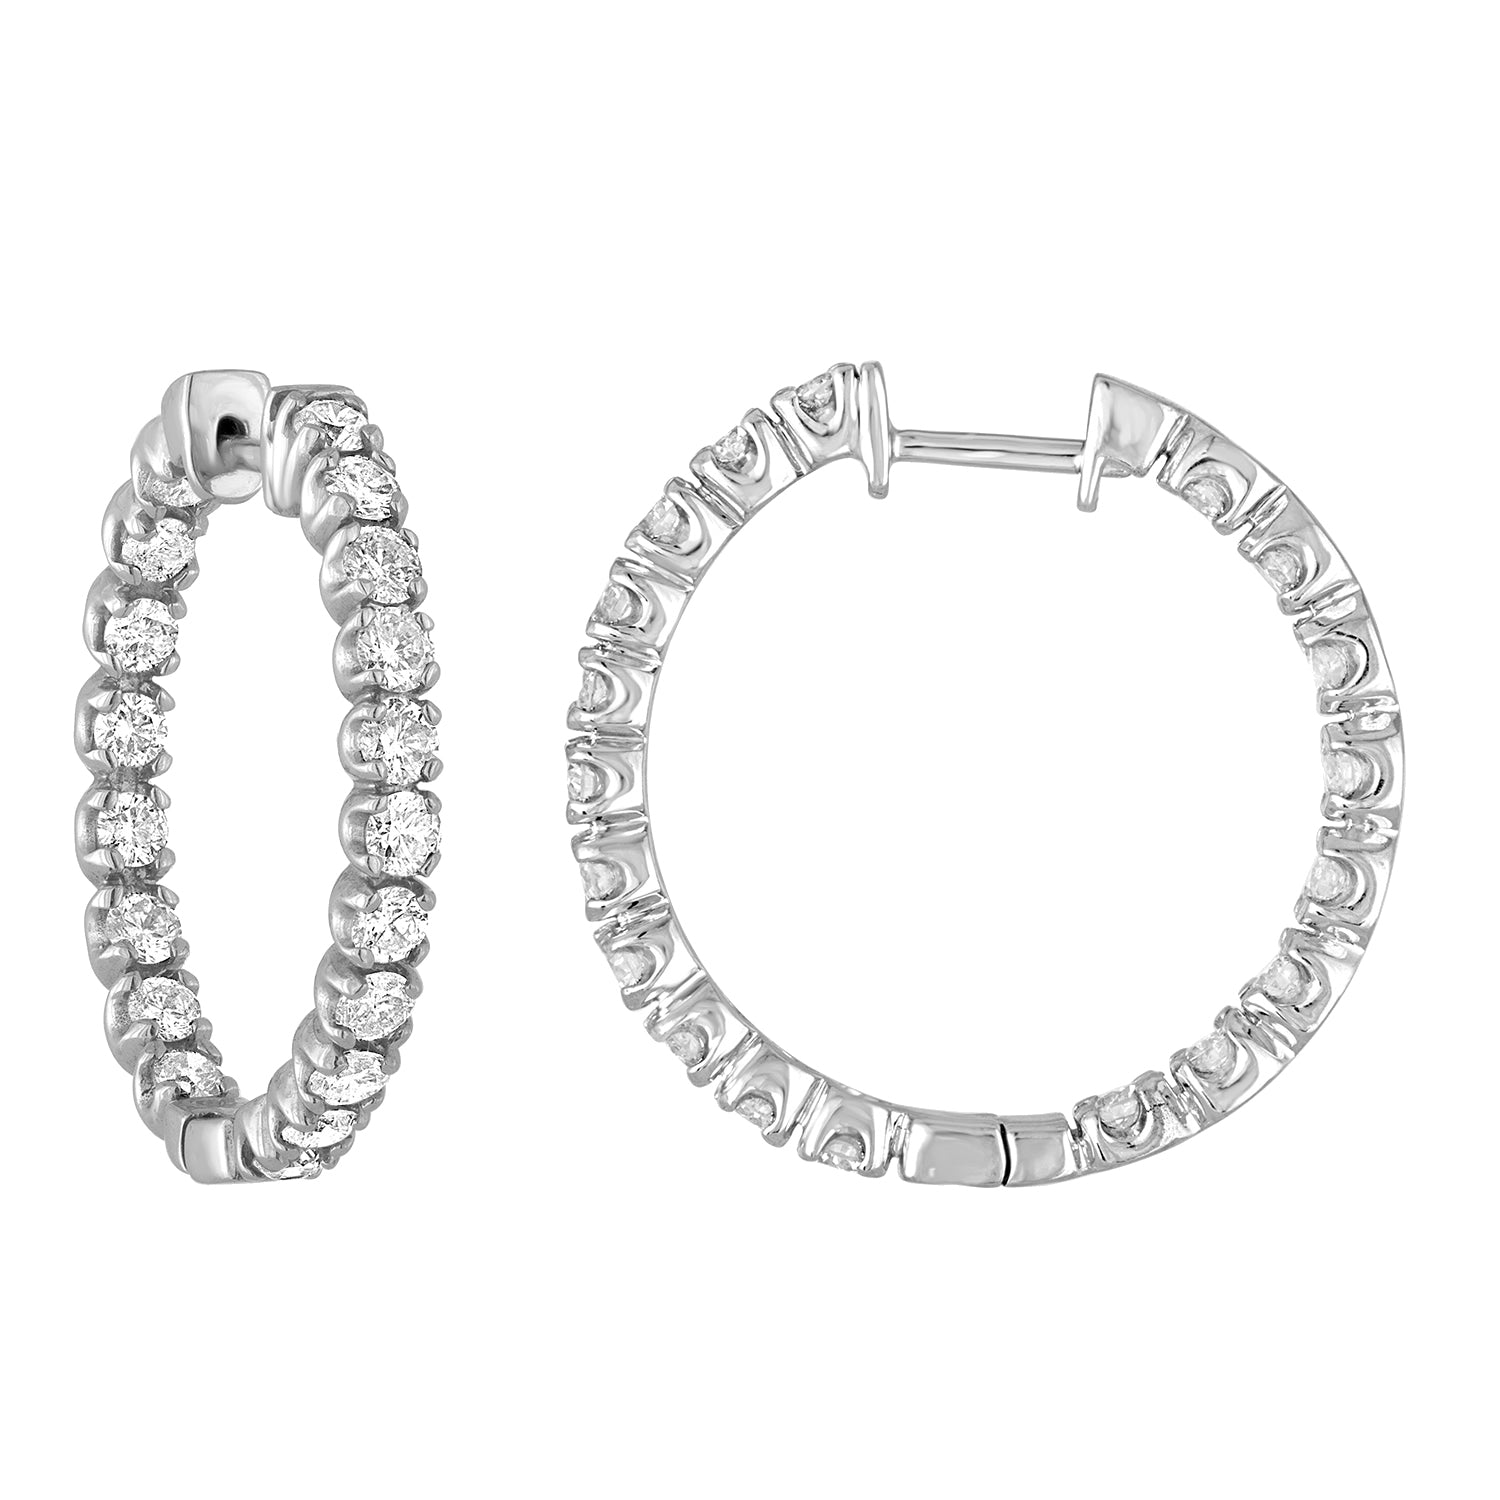 3 cttw Diamond Hoop Earrings 14K White Gold Classic Inside Out Style 1 inch